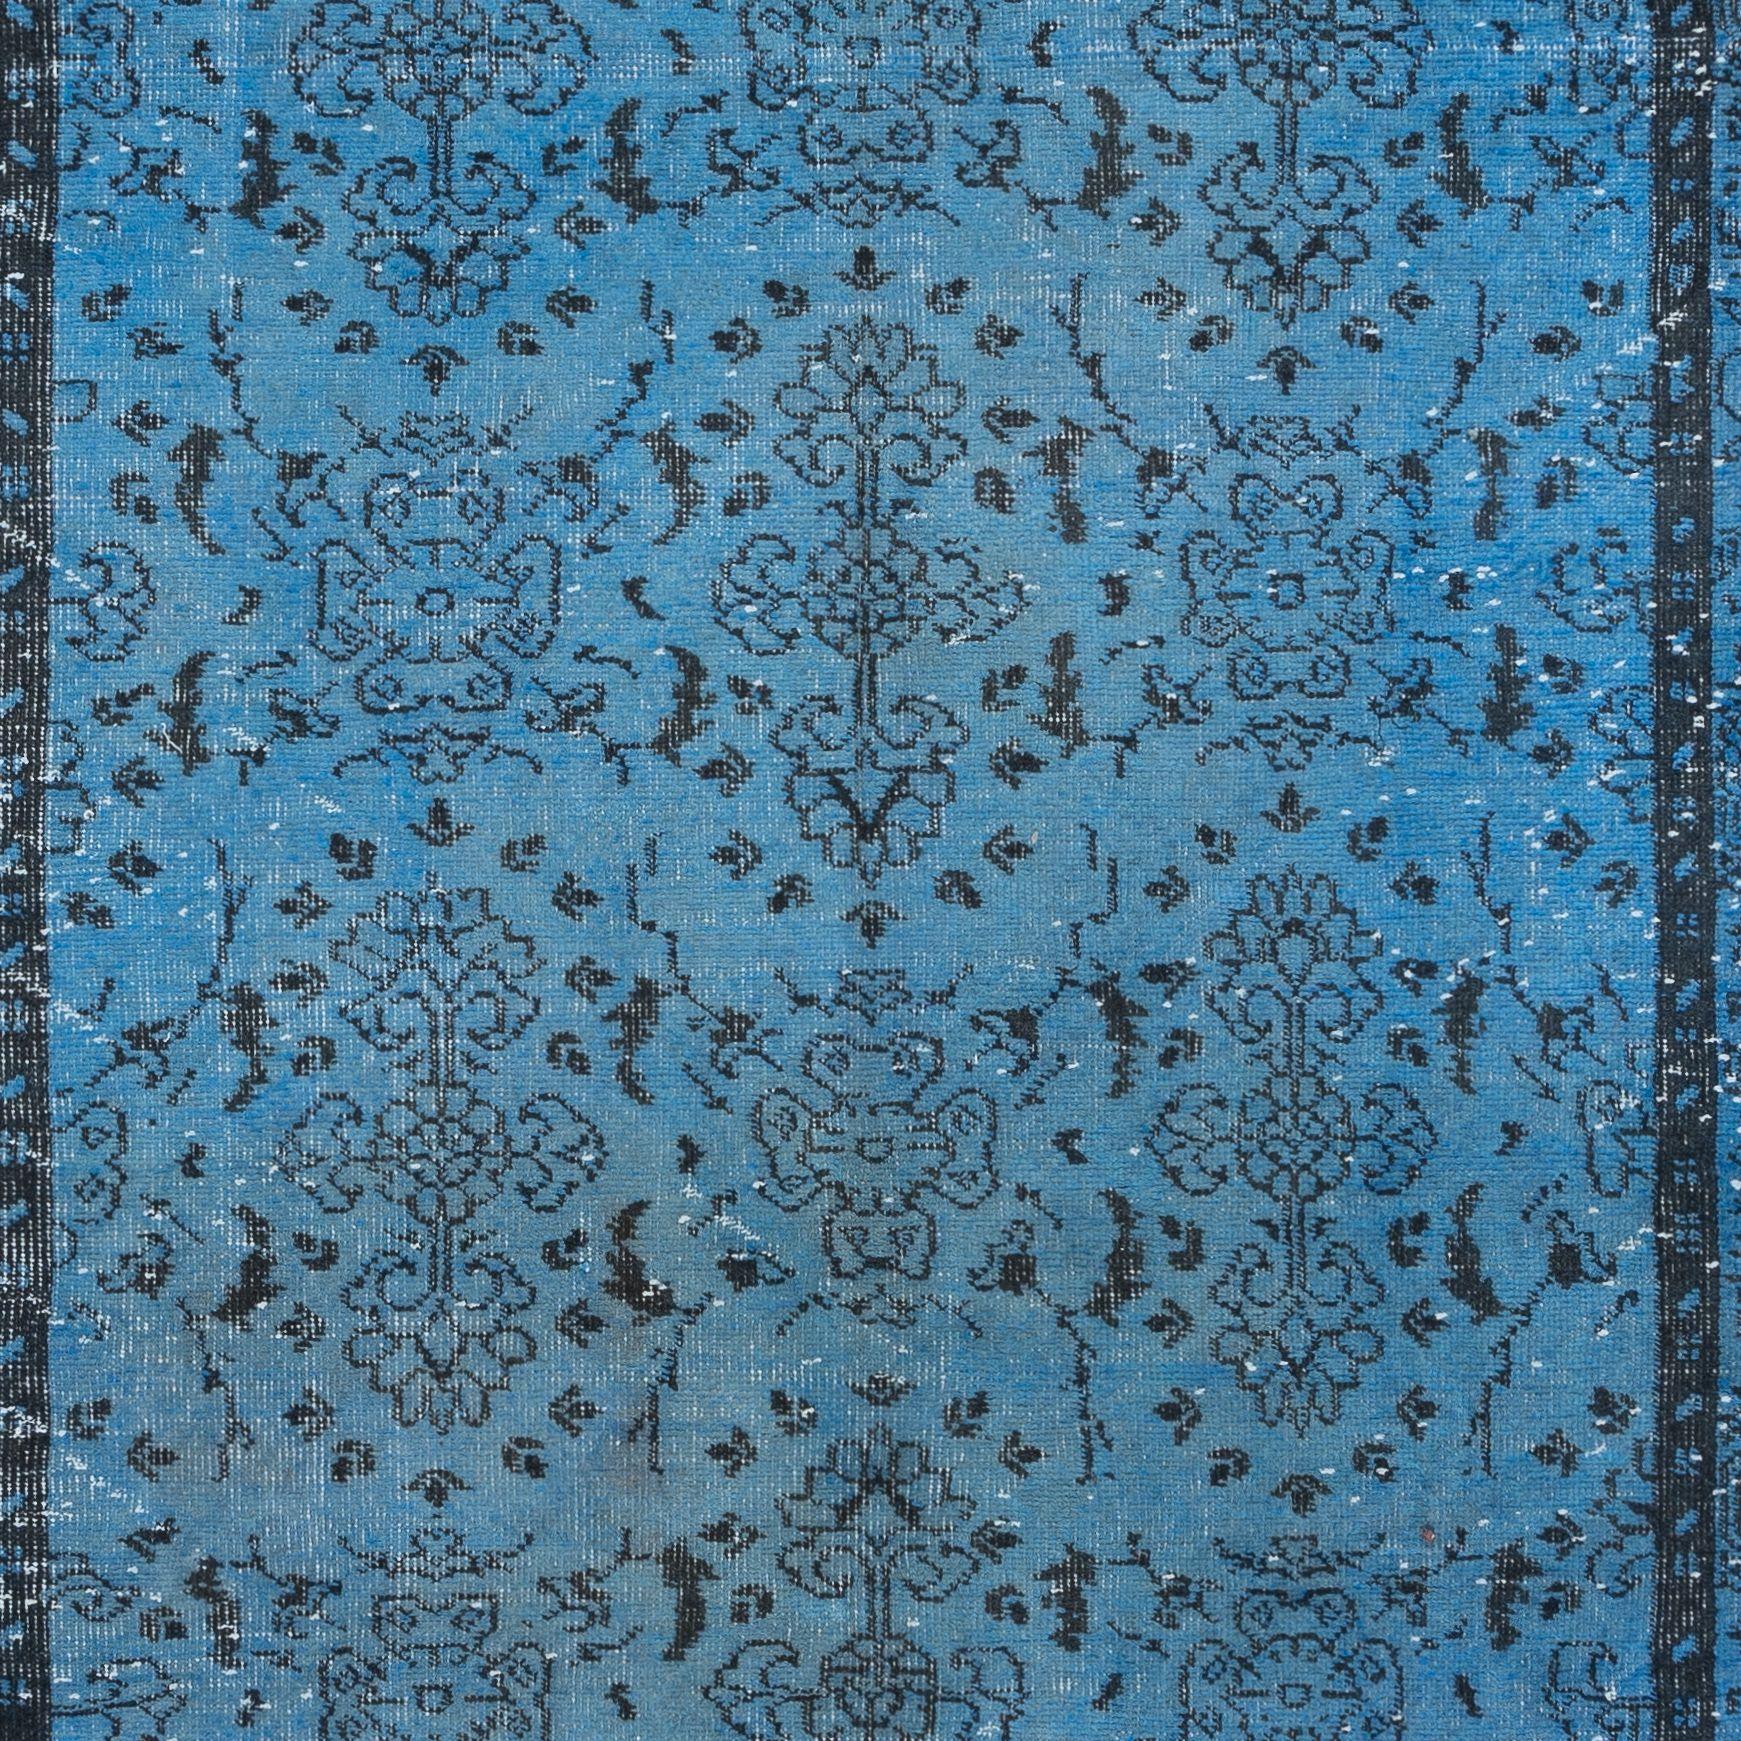 6.2x10 Ft Blue Handmade Area Rug, Turkish Carpet for Dining Room & Living Room In Good Condition For Sale In Philadelphia, PA